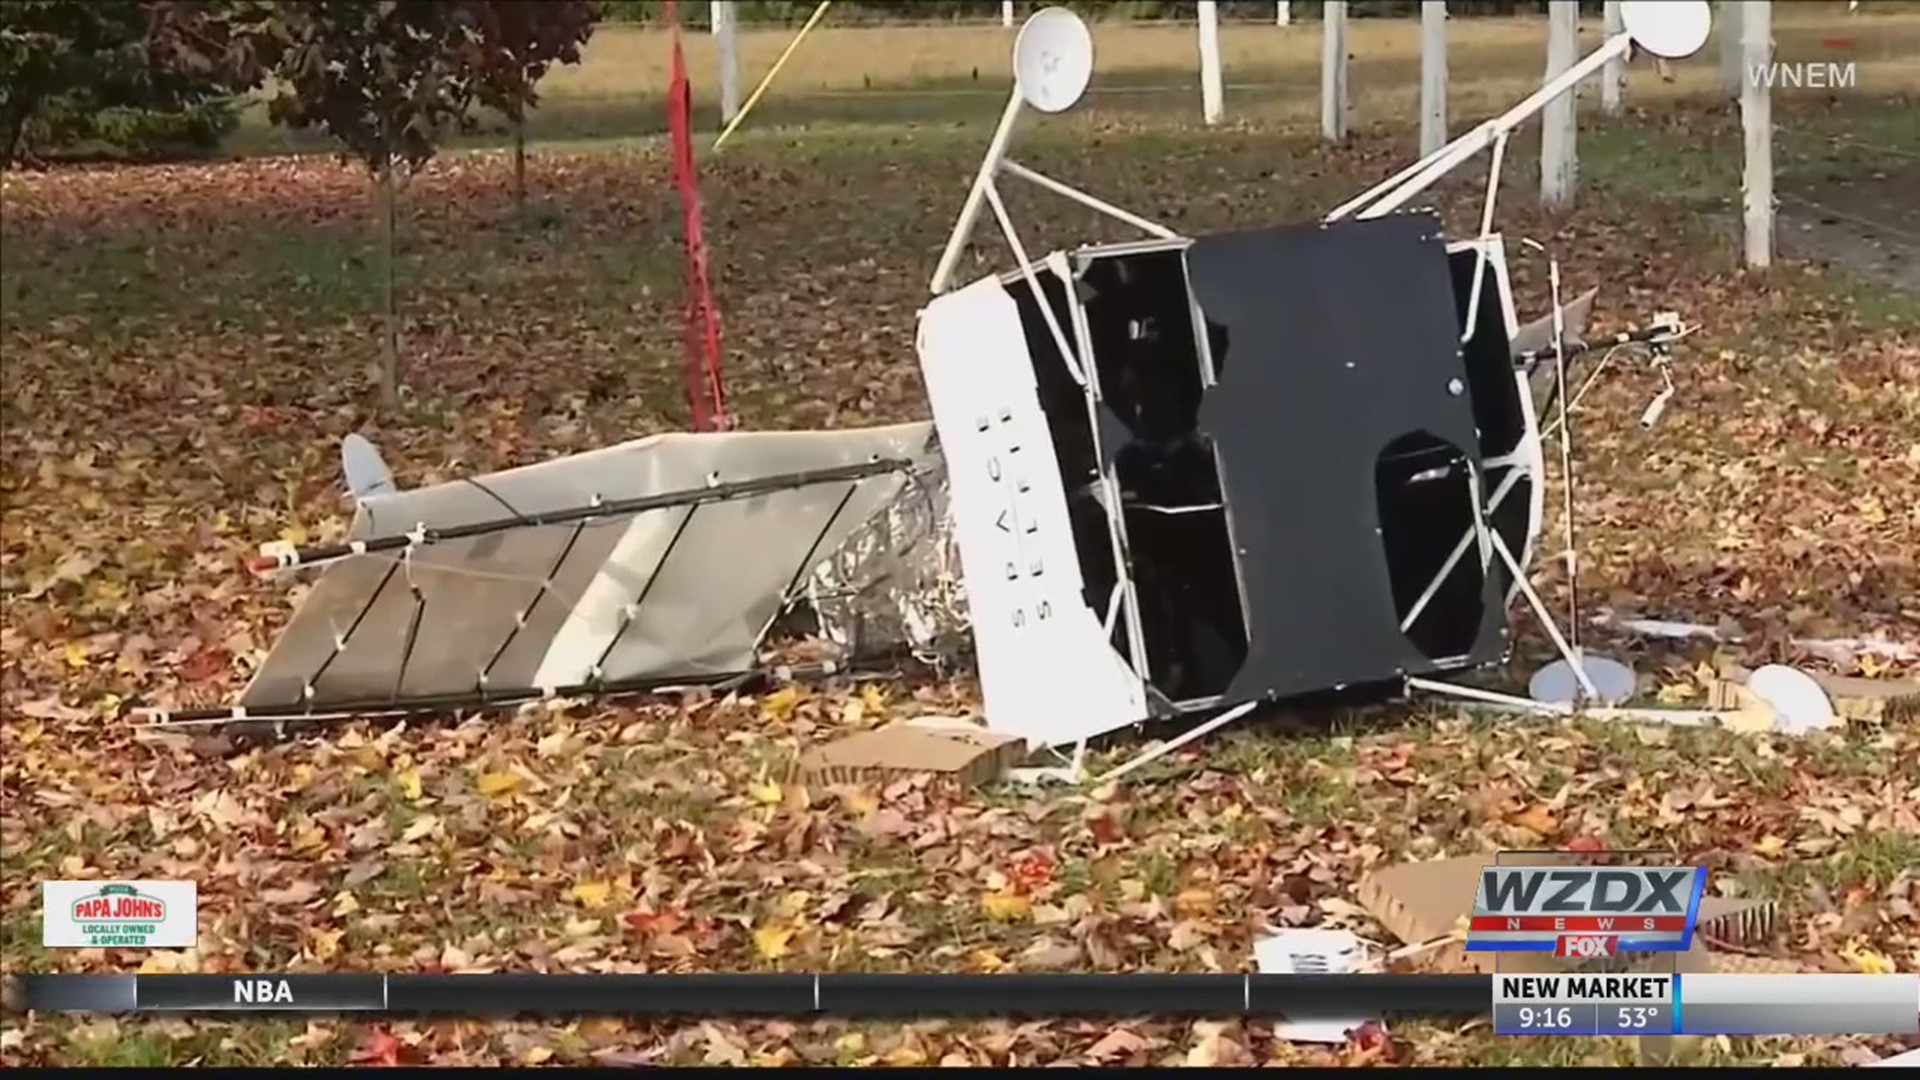 That's not a Halloween prop - that's an actual satellite that crashed onto someone's front lawn.